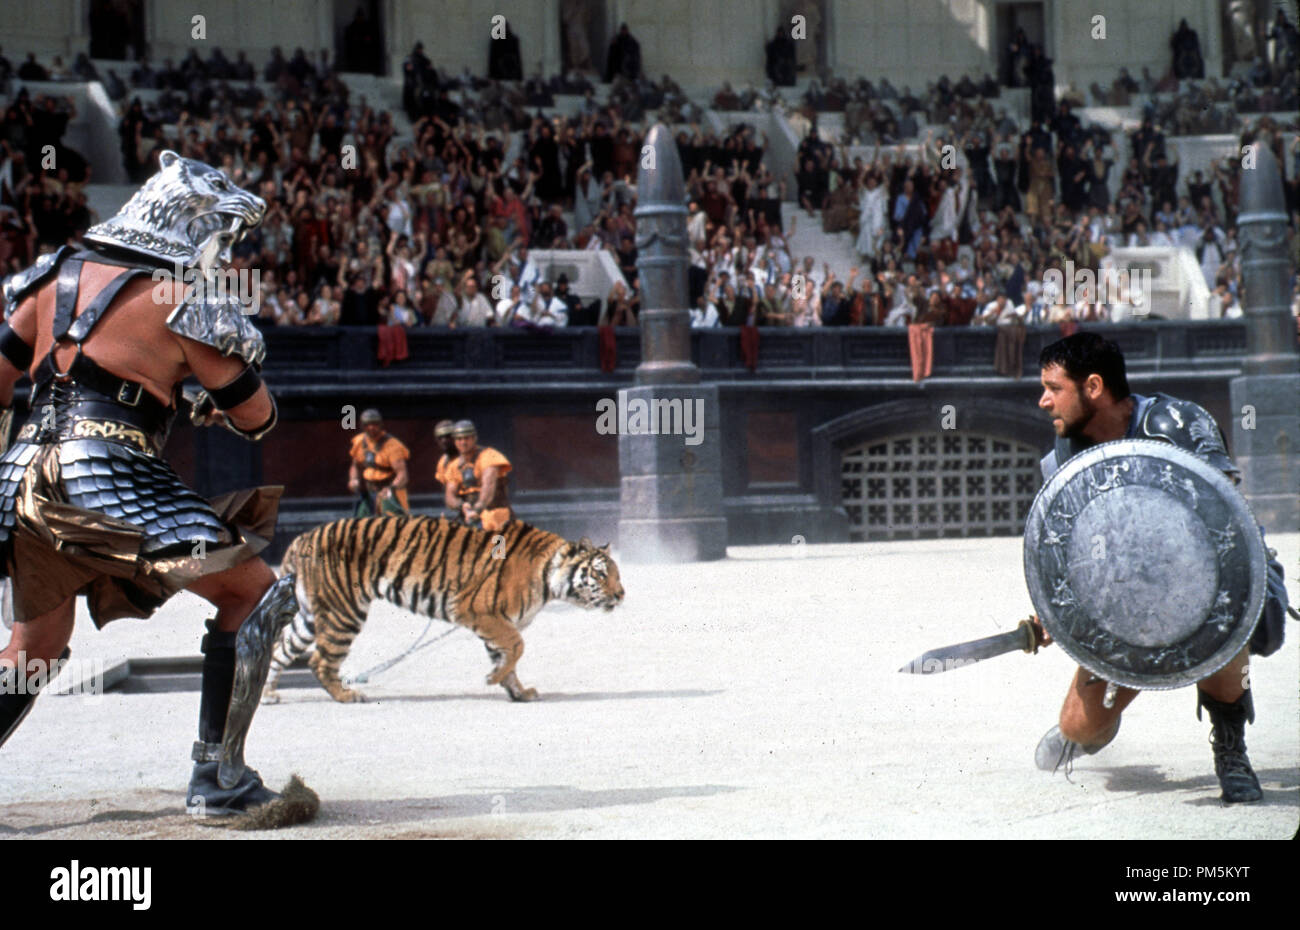 Film Still / Publicity Stills from 'Gladiator' Russell Crowe © 2000 Universal / DreamWorks Photo Credit: Jaap Buitendijk File Reference # 30846486THA  For Editorial Use Only -  All Rights Reserved Stock Photo